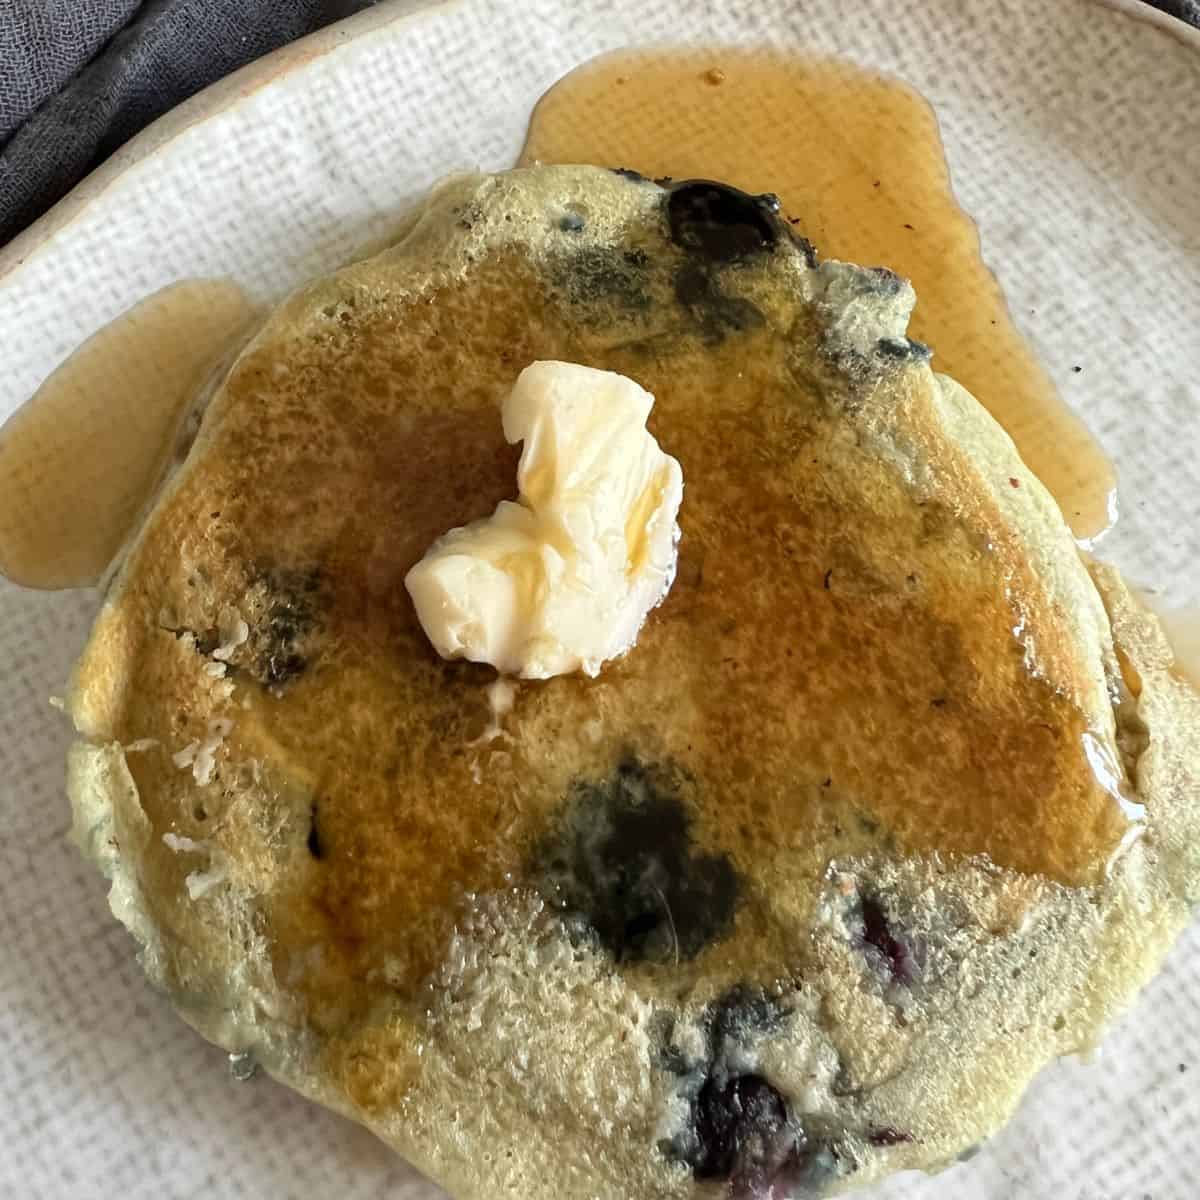 Are you looking for the perfect breakfast for brunch on Mother's Day? Trisha Yearwood's Blueberry Pancakes are some of the best blueberry pancakes you'll ever make! 